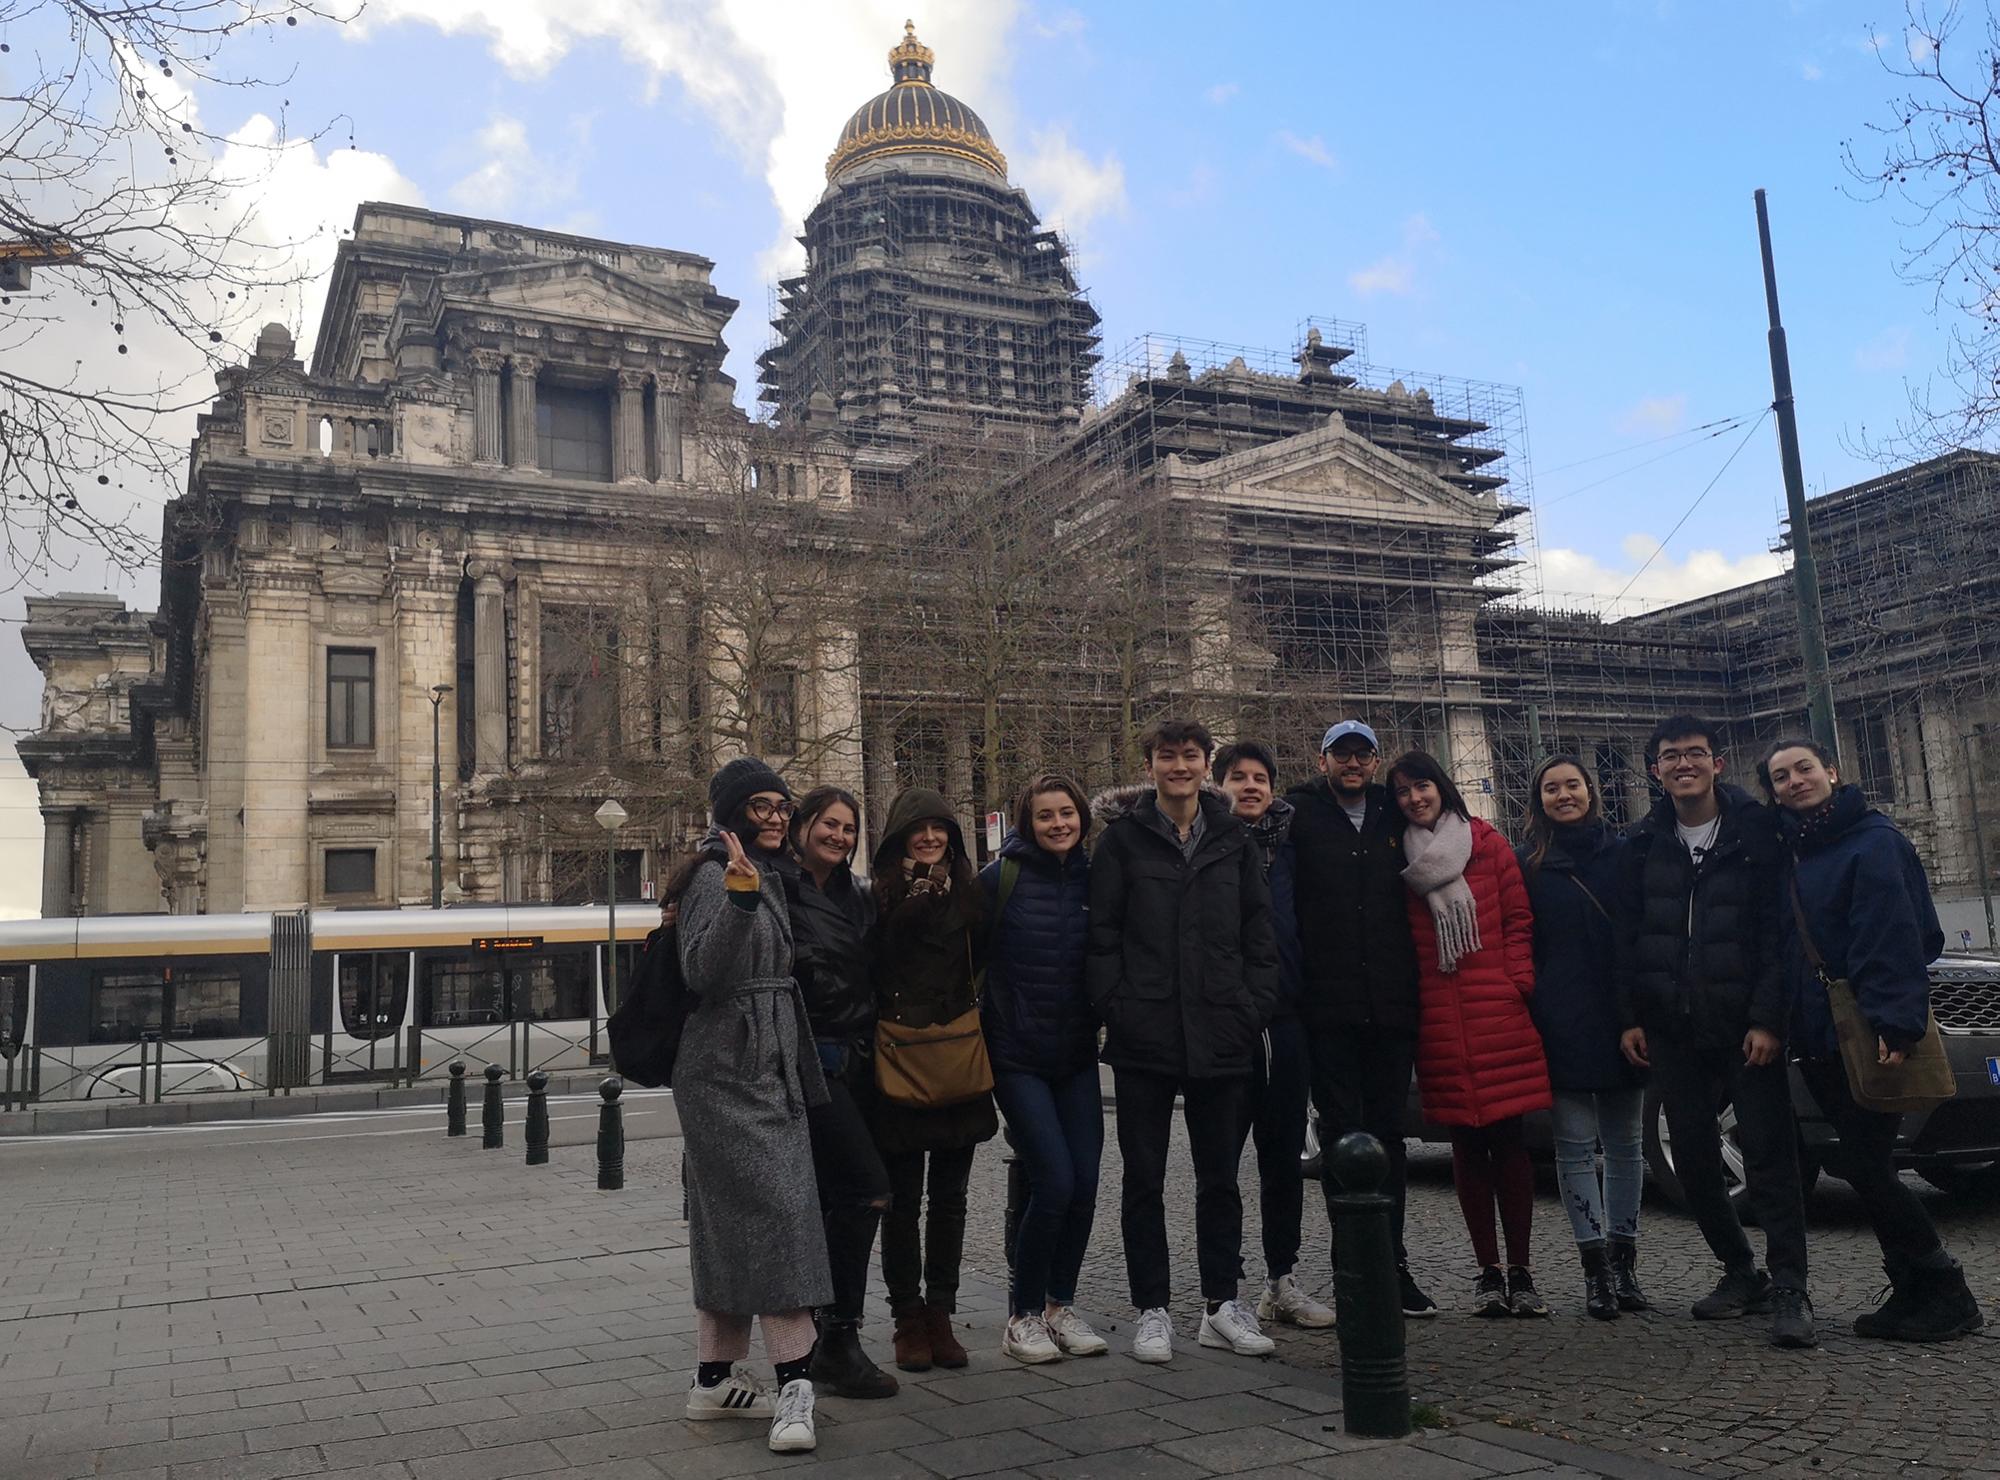 Frances Garnett poses in front of large historic building with group of students